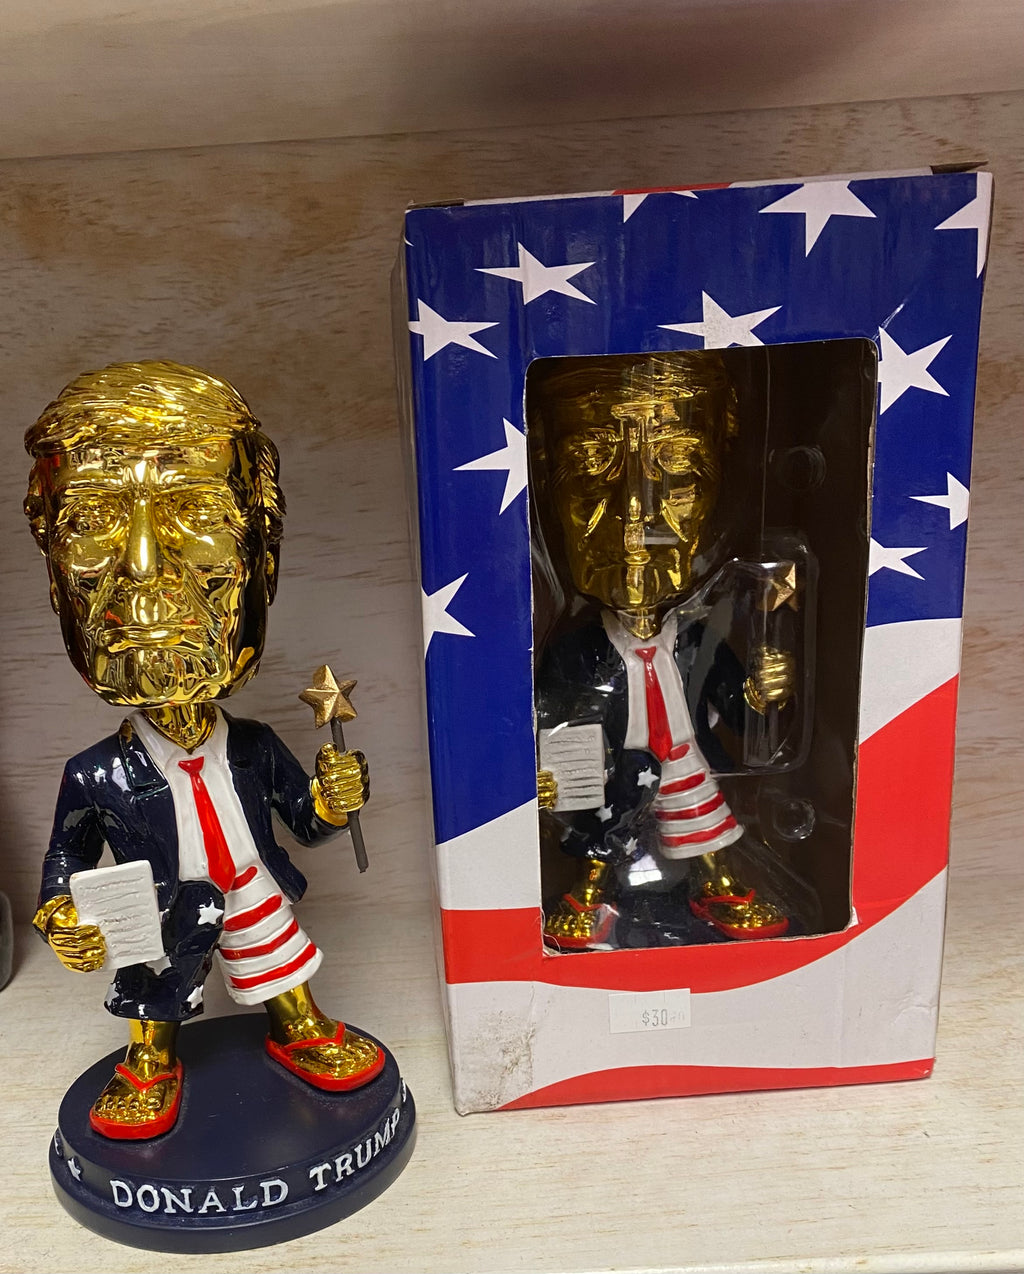 Golden Trump Potus Bobblehead 7 inches tall collectible statue